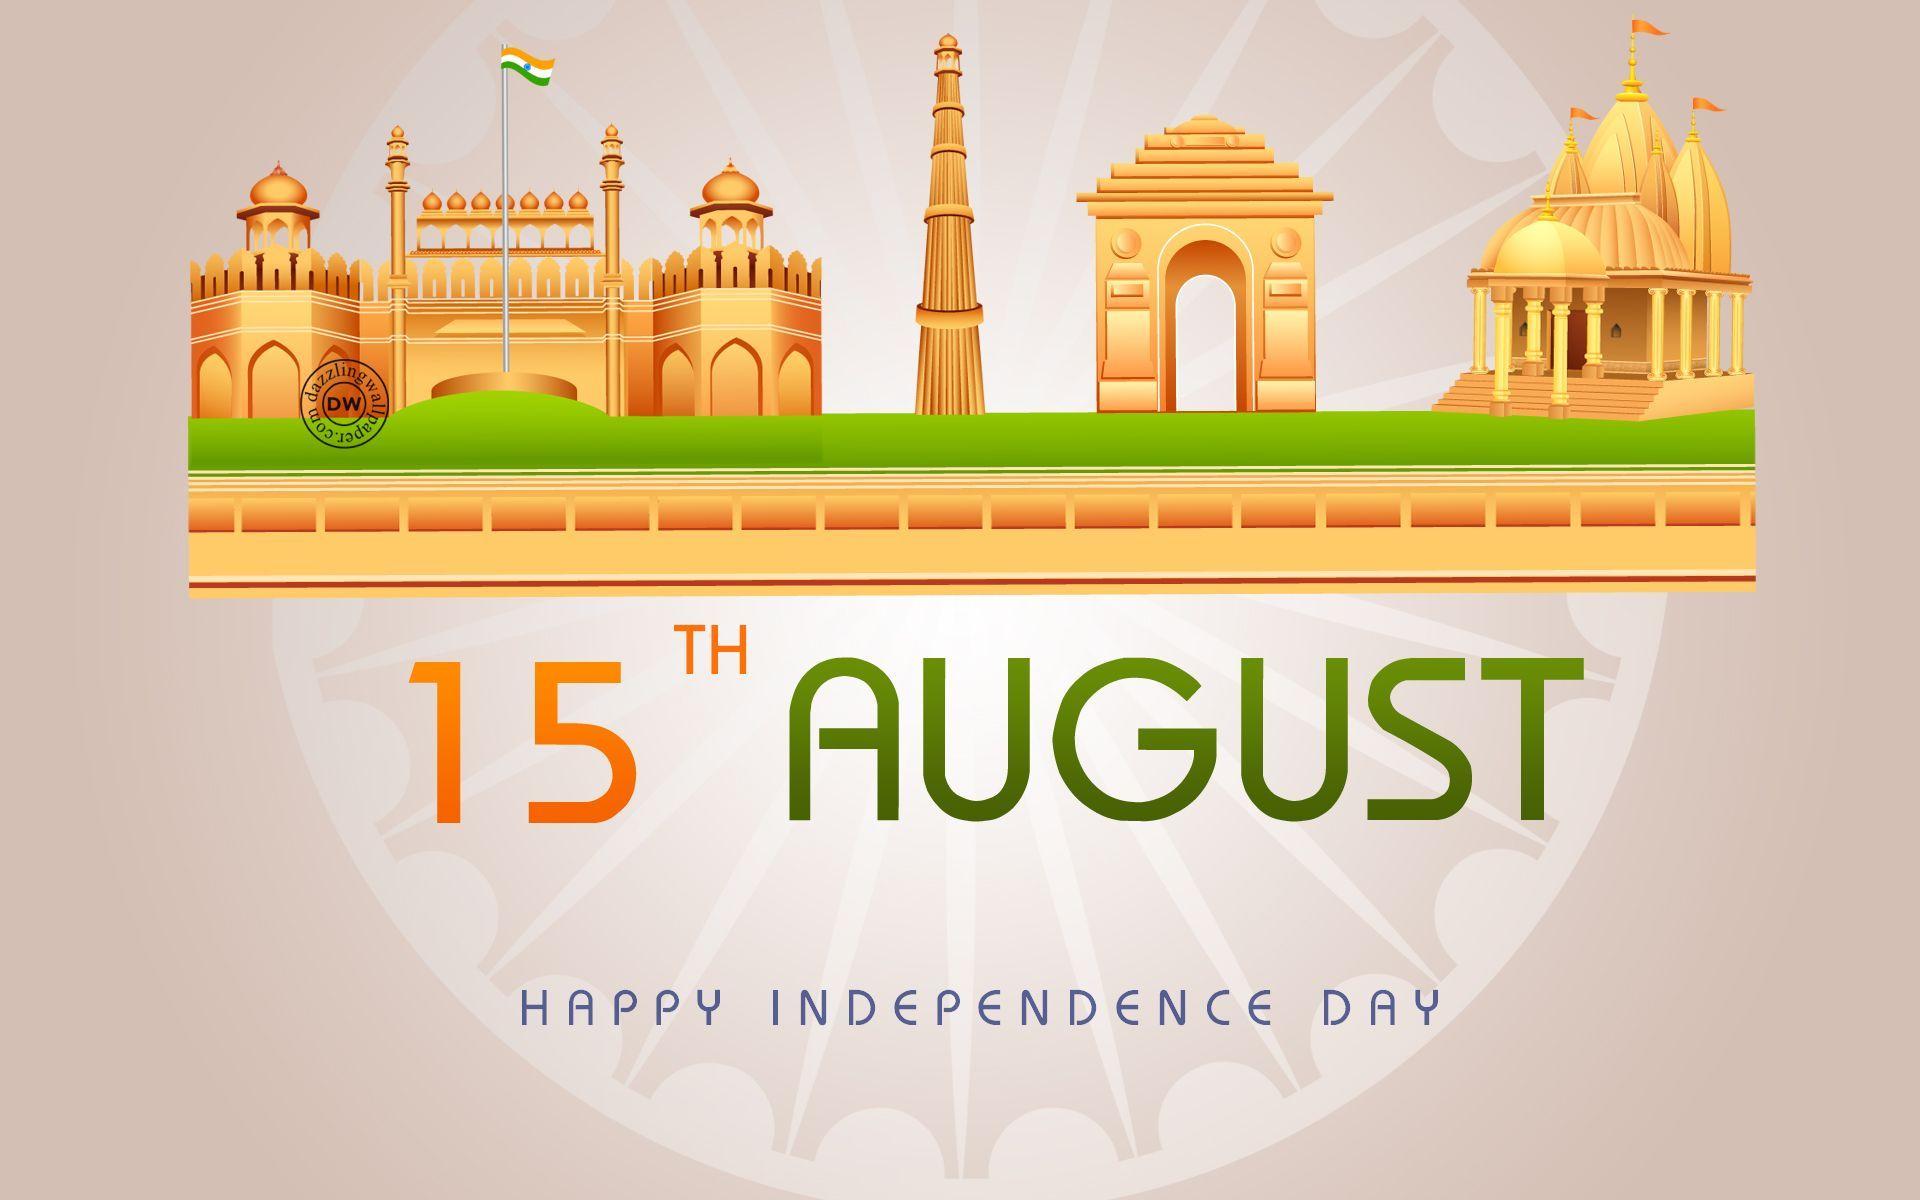 Indian Independence Day HD Pic Wallpapers 2016 - Wallpaper Cave